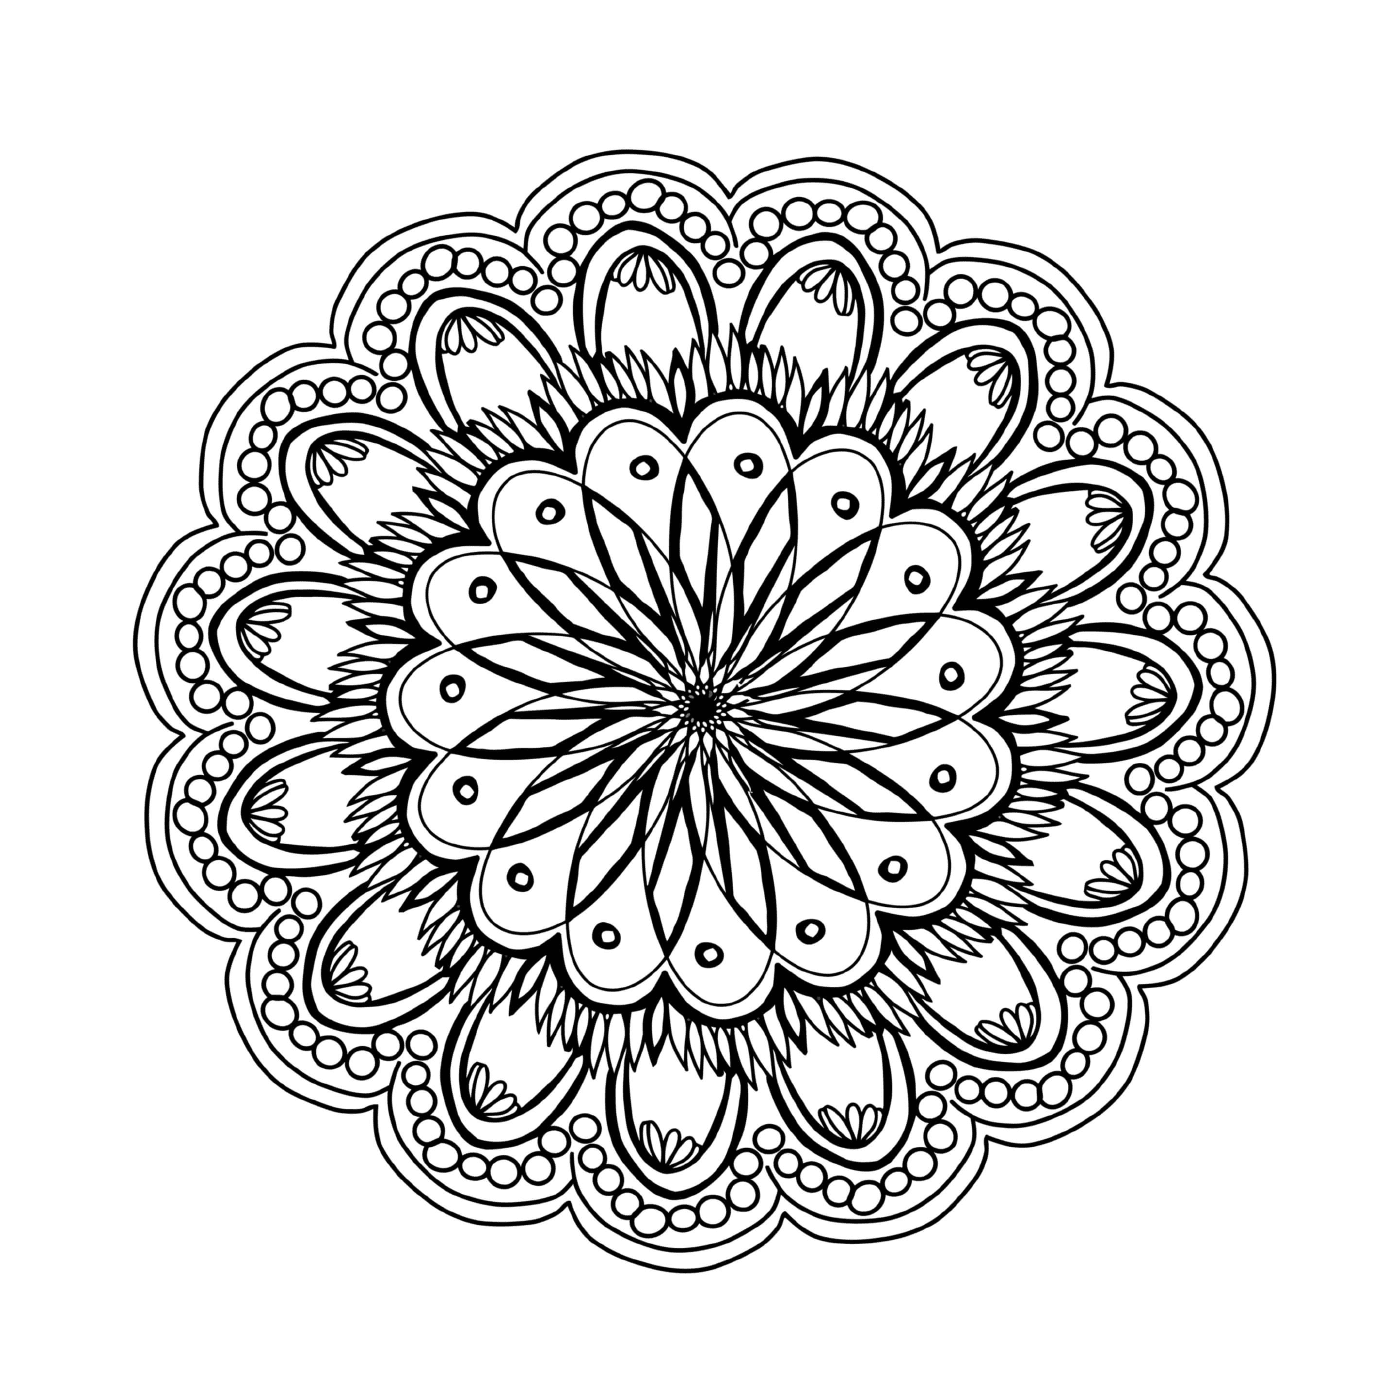  A flower with a circular pattern 